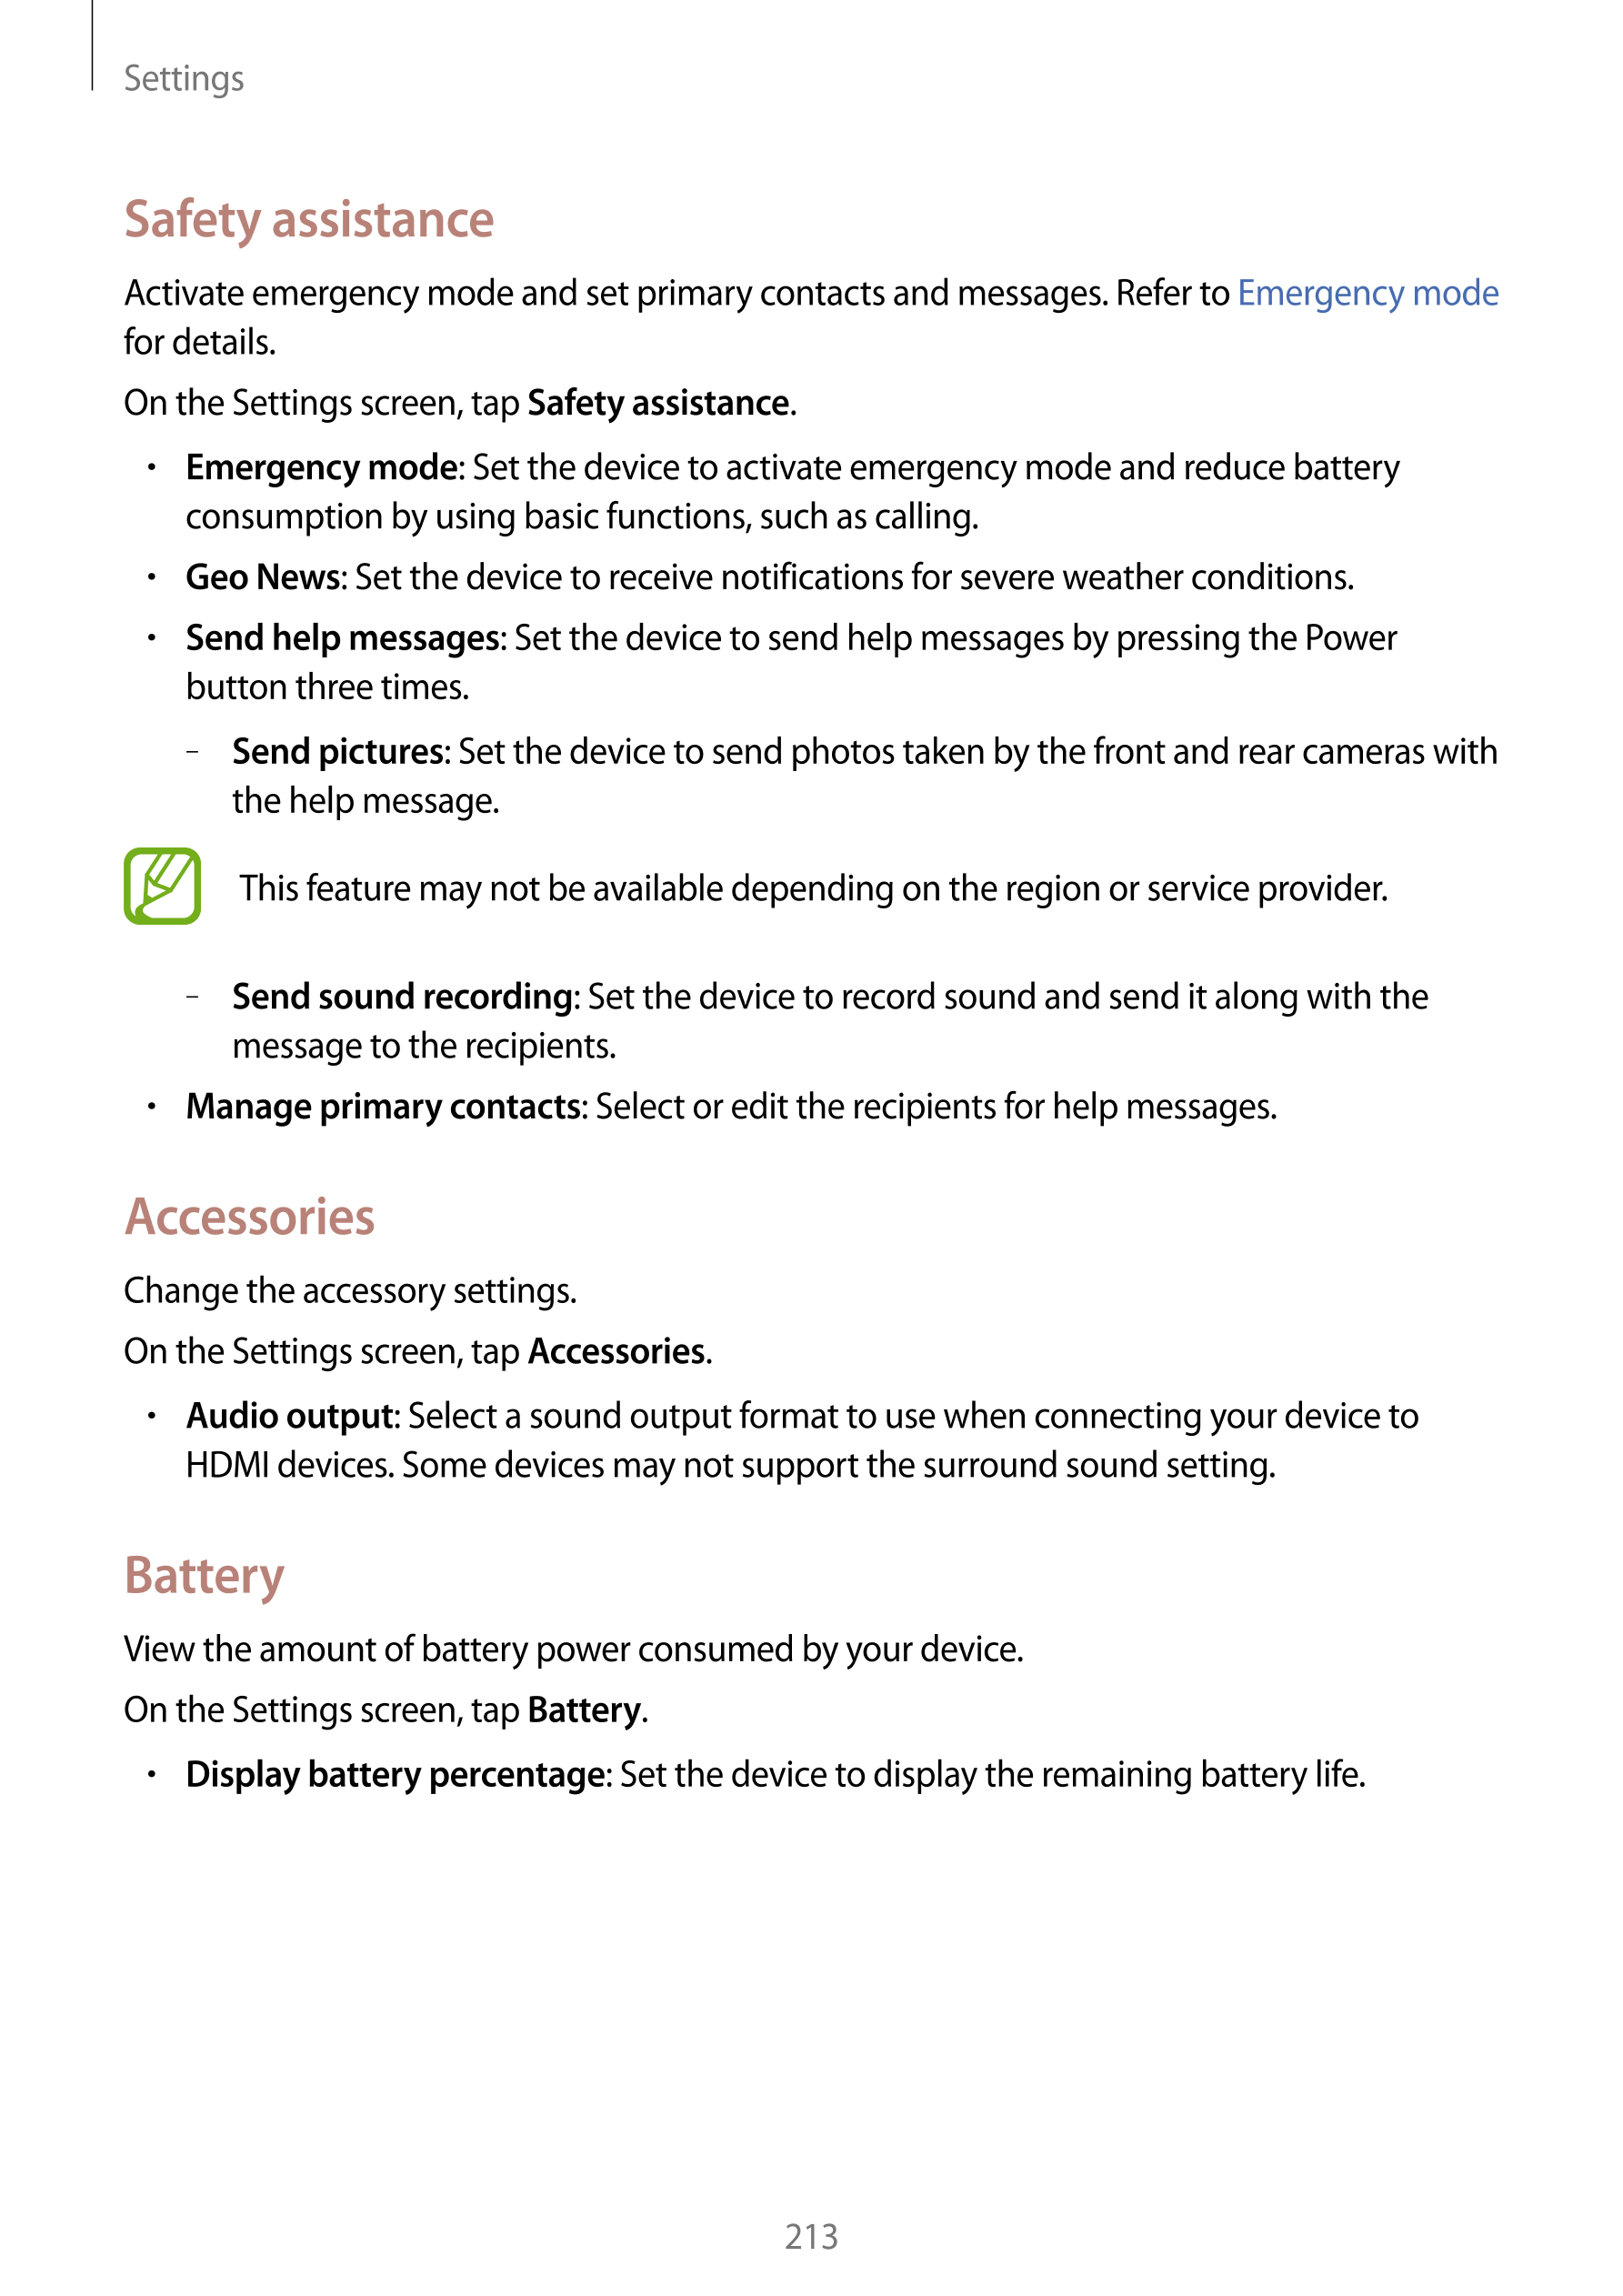 Settings
Safety assistance
Activate emergency mode and set primary contacts and messages. Refer to  Emergency mode 
for details.